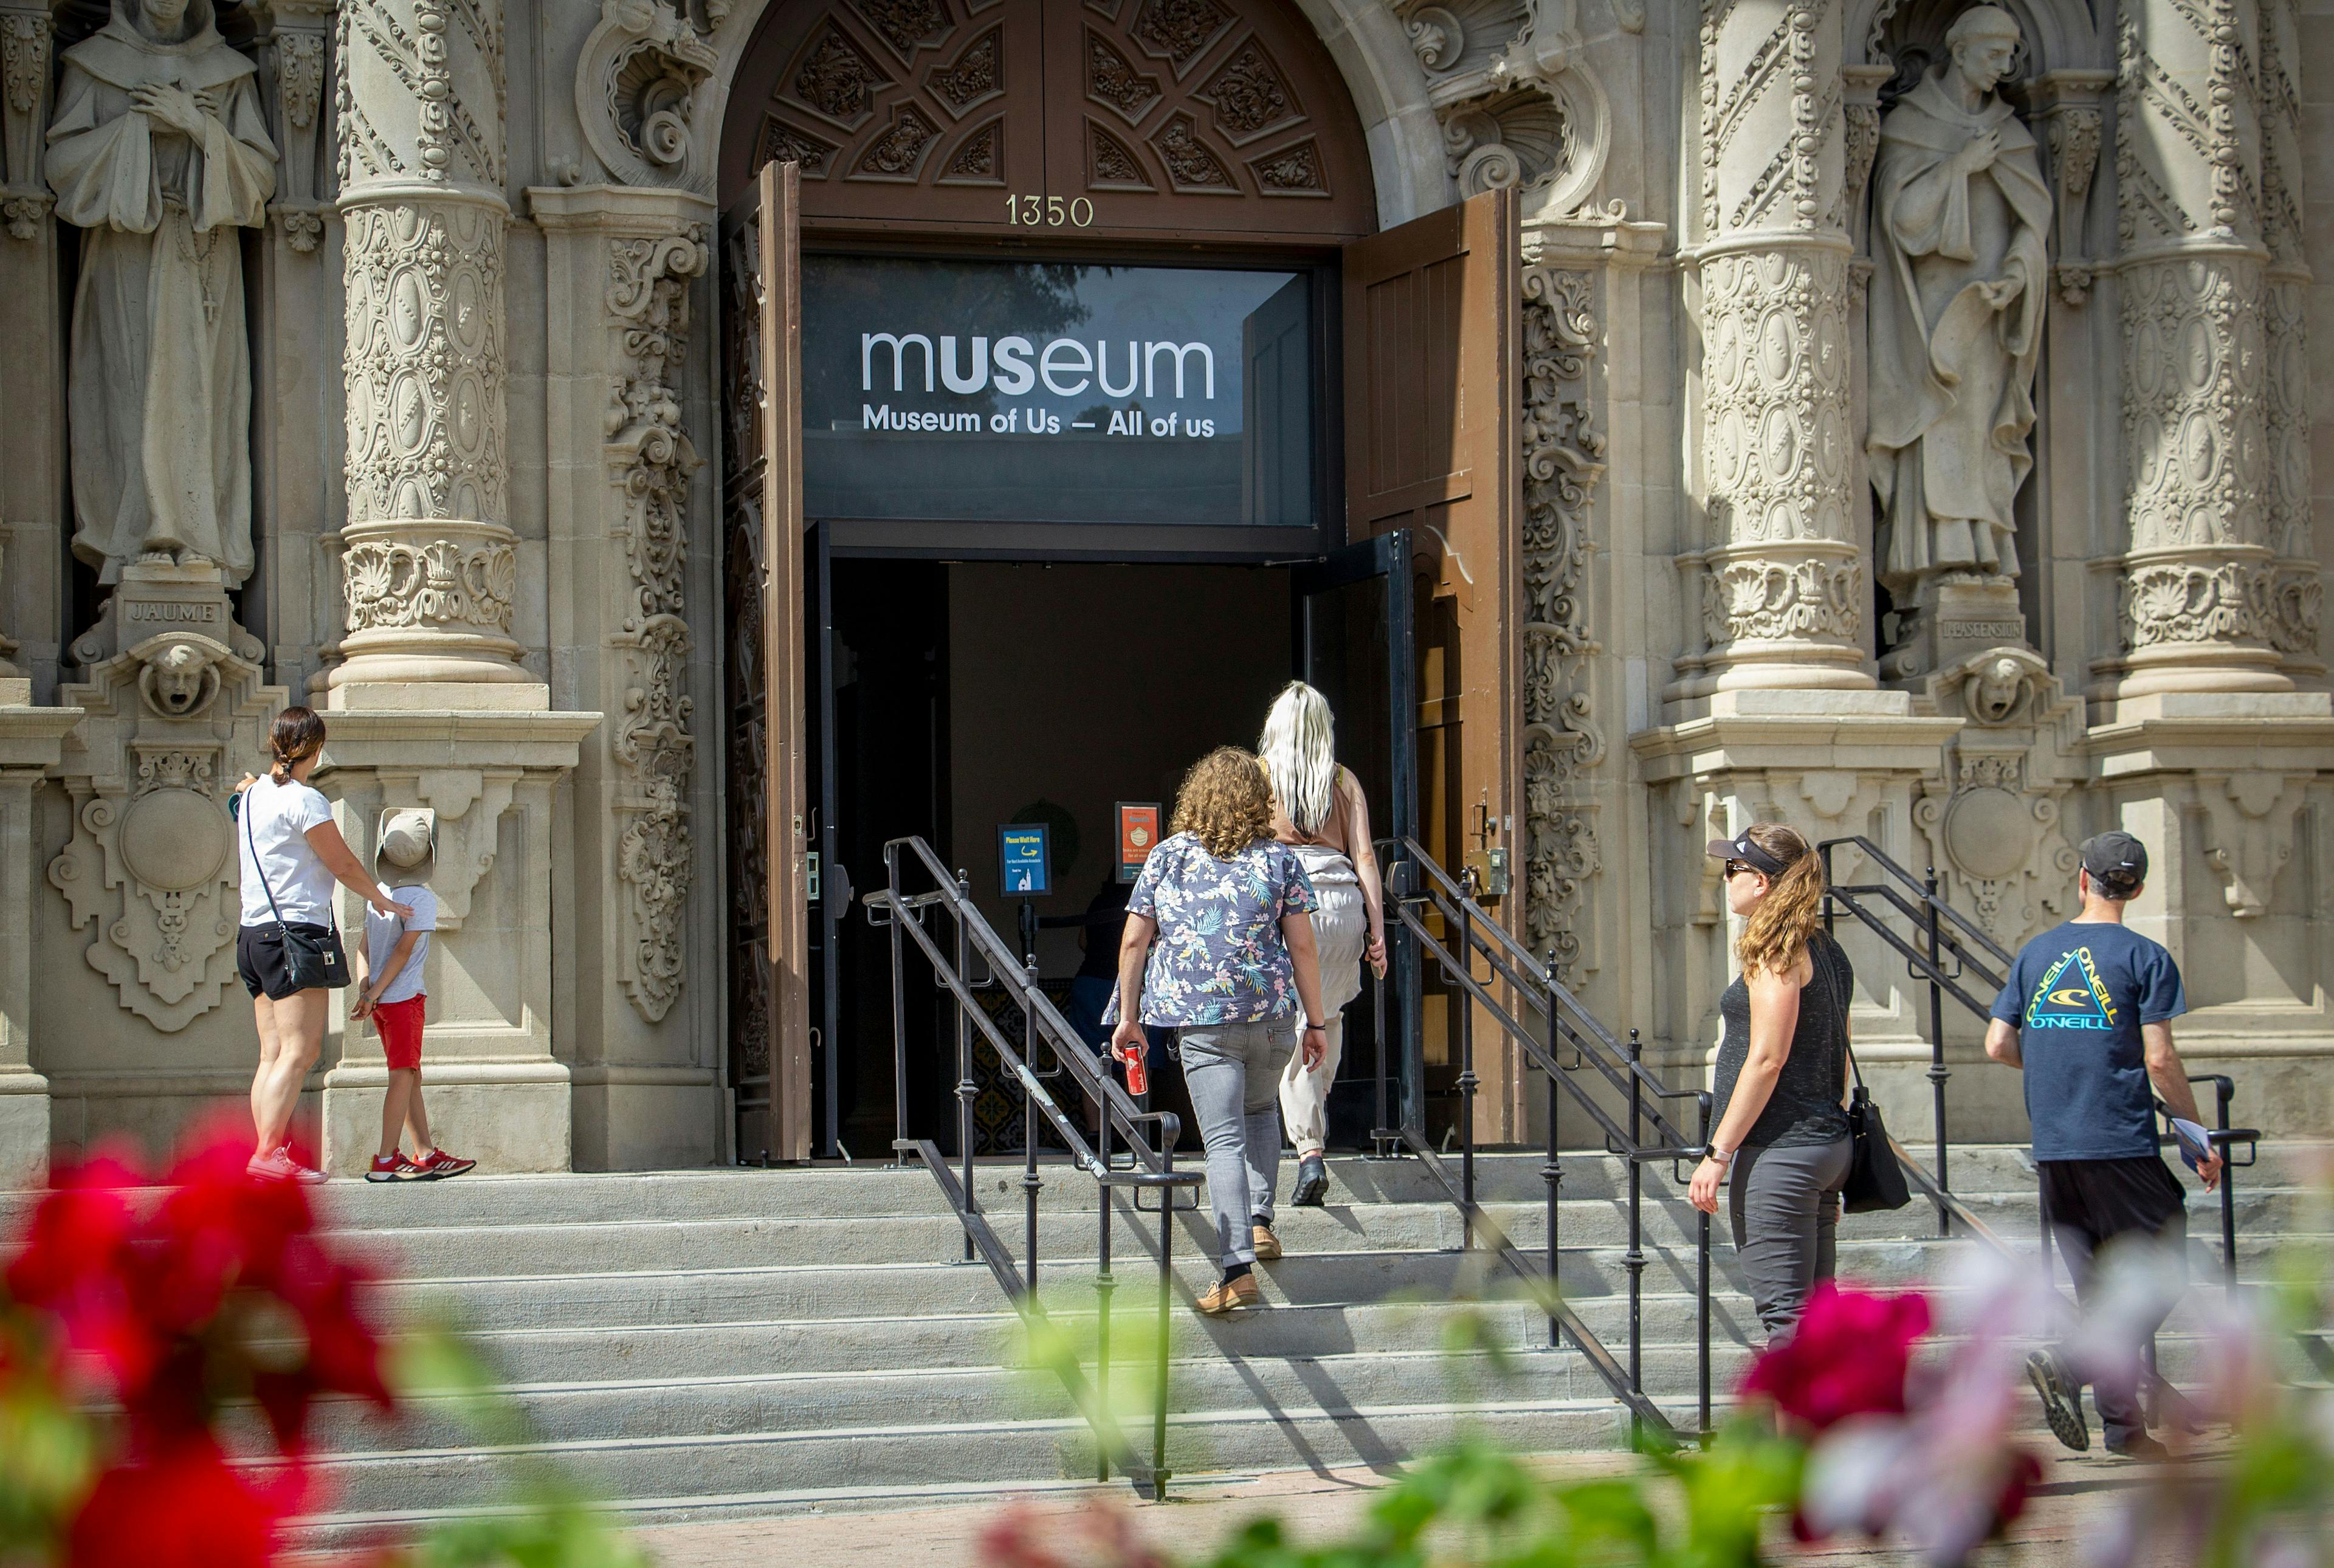 Various people walking up the stairs and into the Museum of Us lobby entrance. In the foreground are potted flowers.